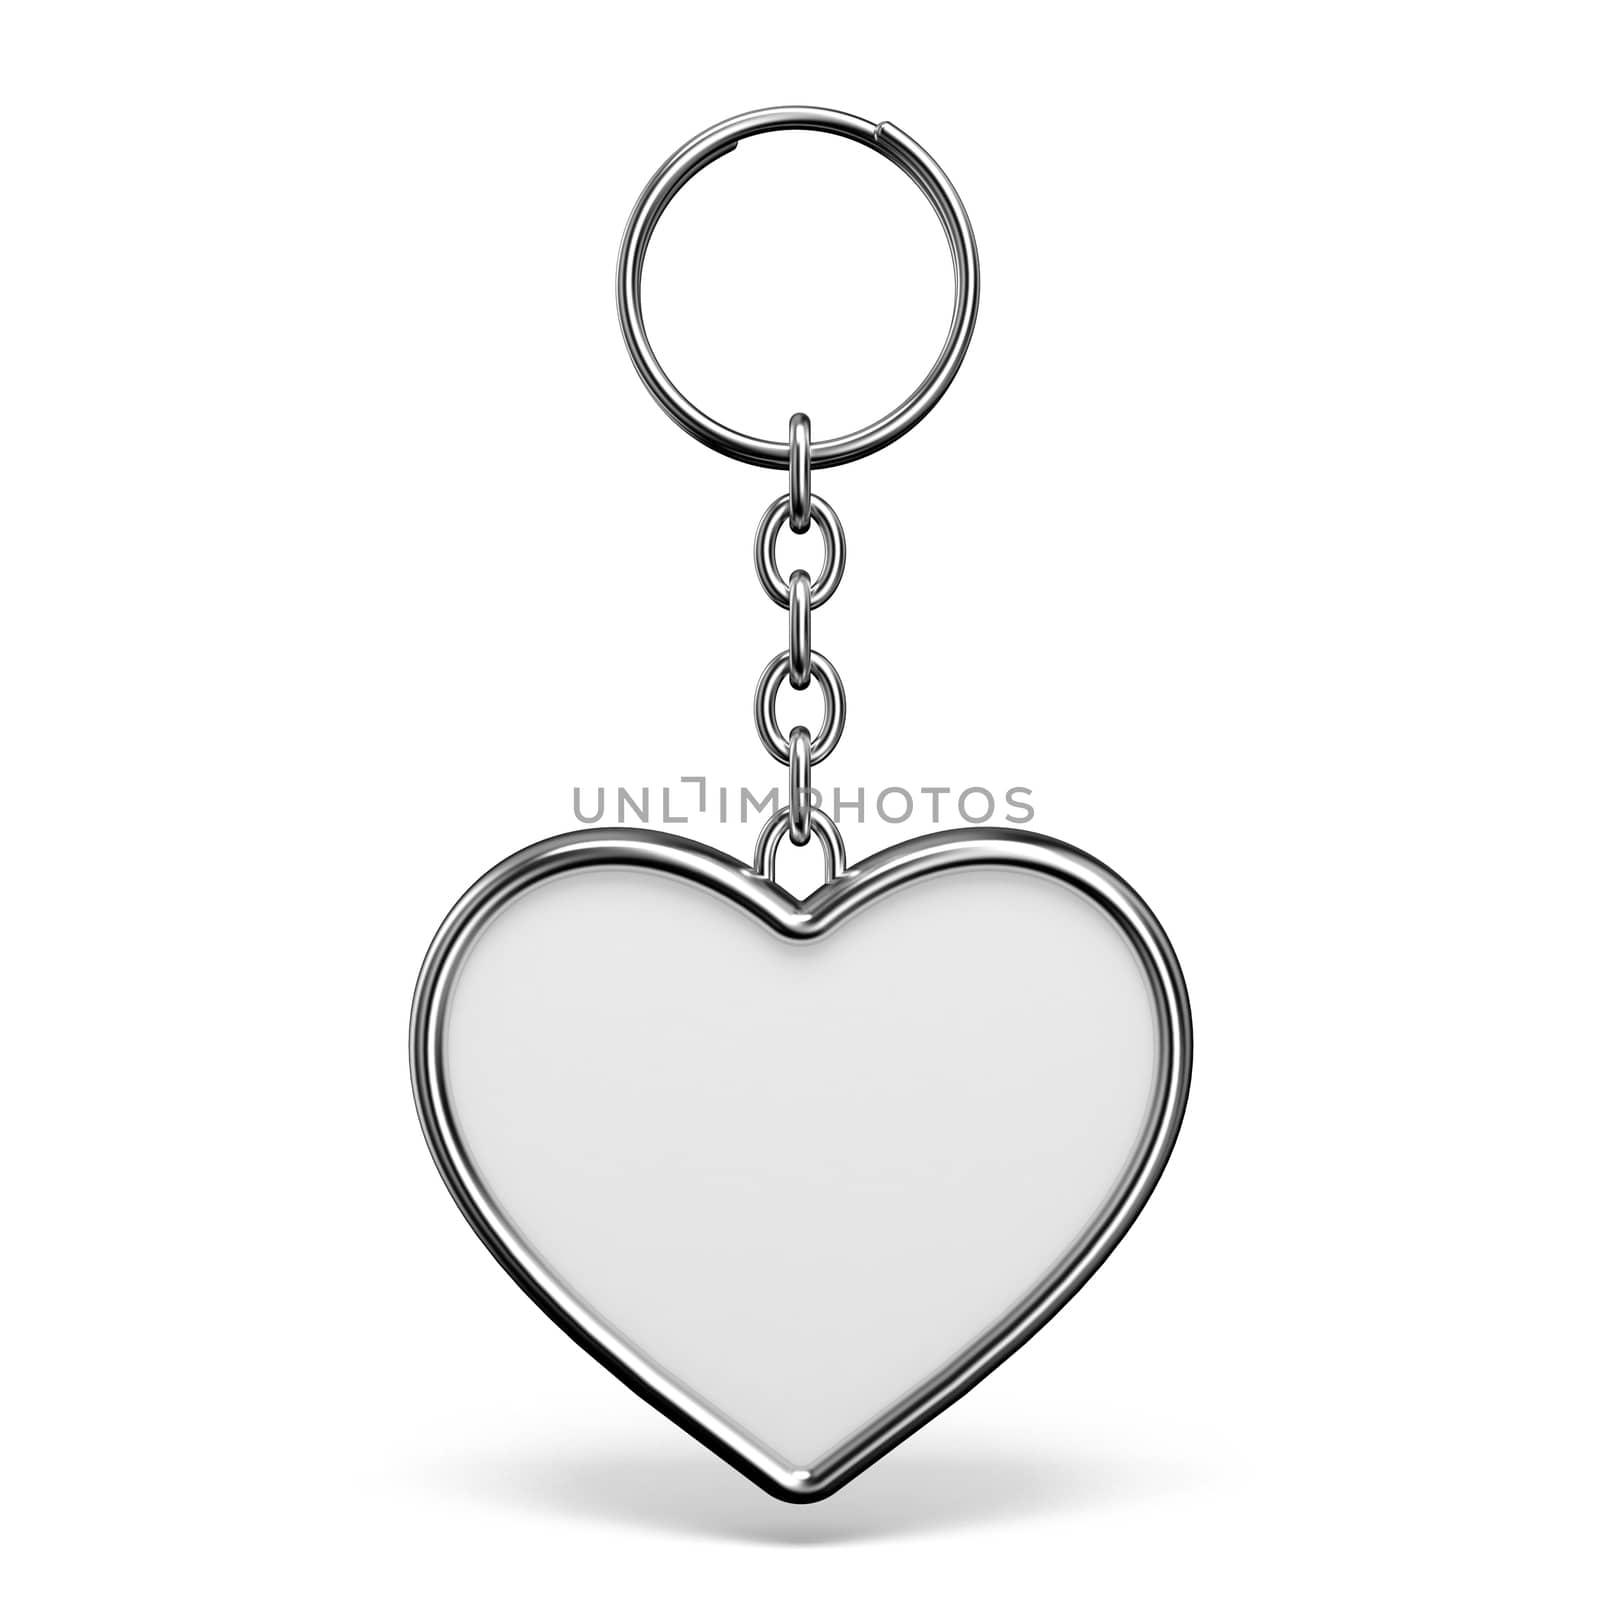 Blank metal trinket with a ring for a key heart shape 3D rendering illustration isolated on white background